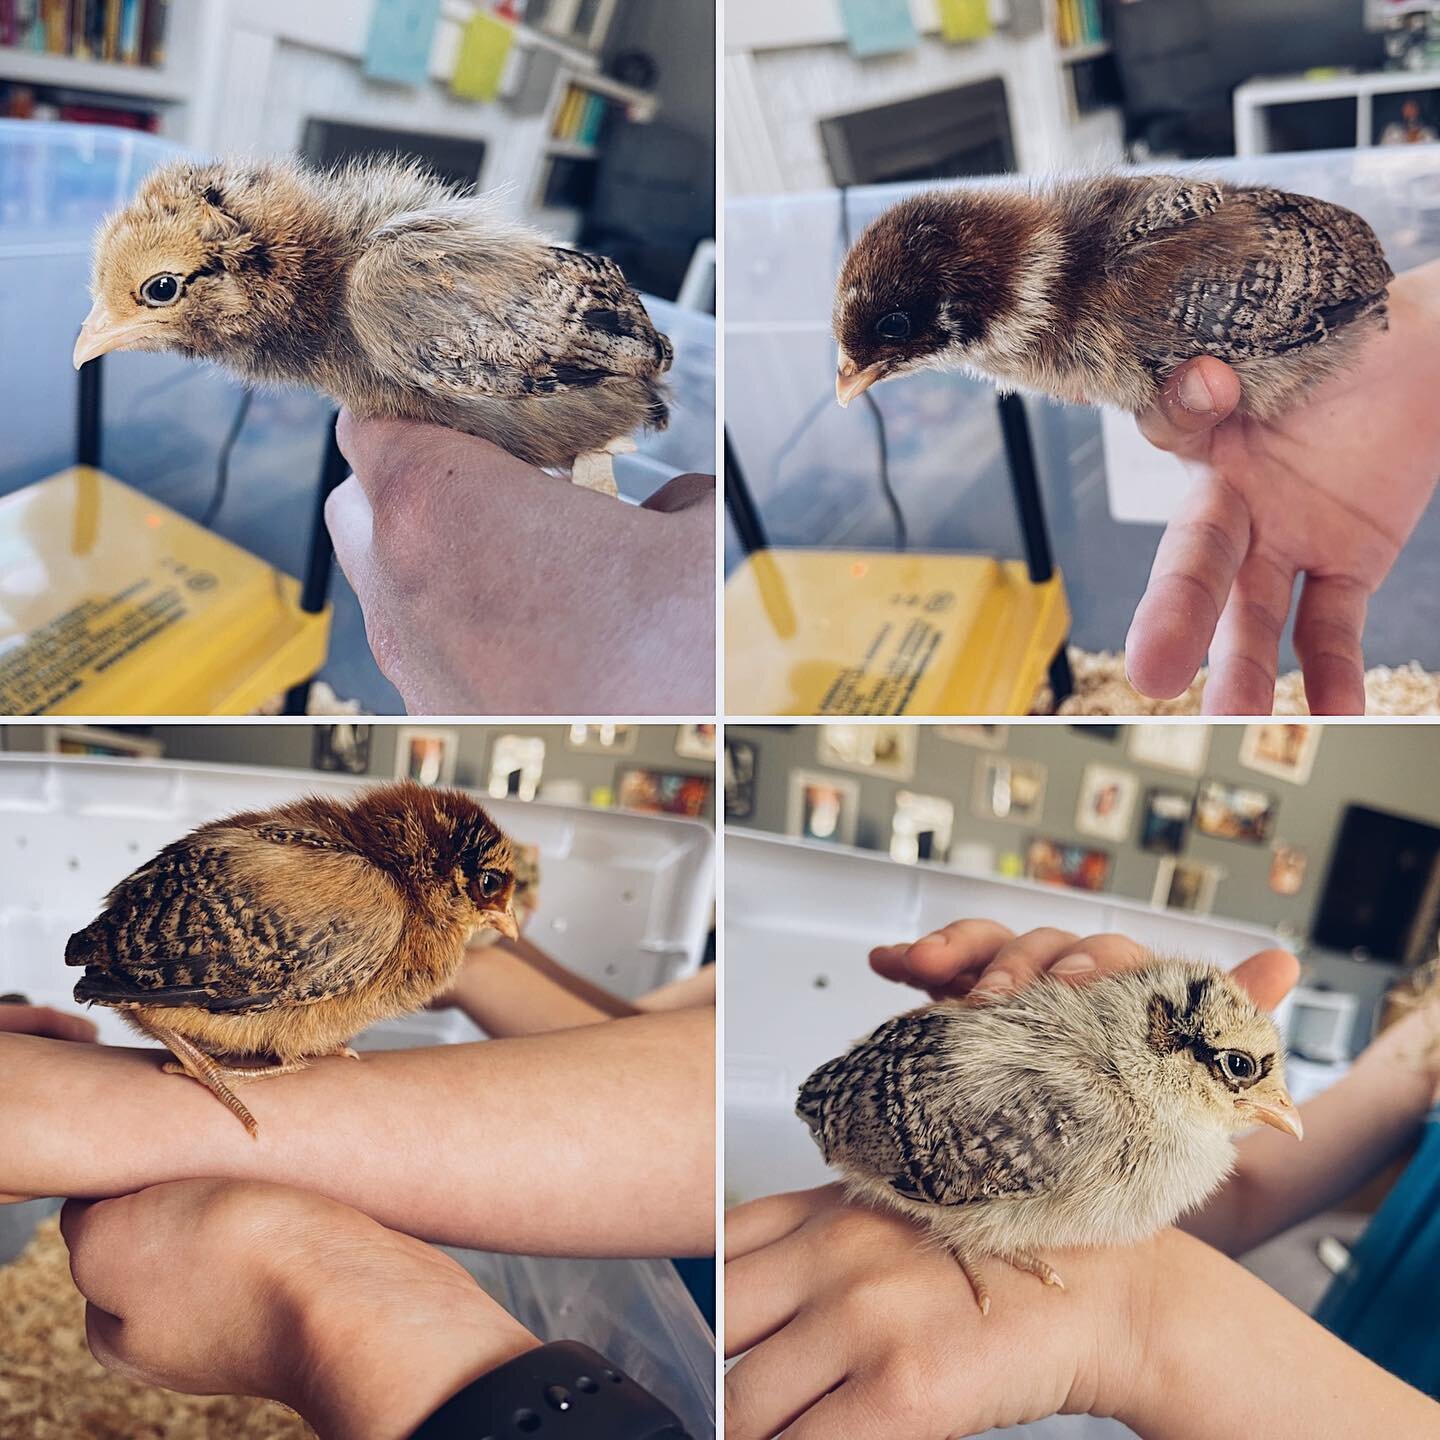 A little interruption from my otherwise thriving bookstagram content (ah-hem, yeah, it&rsquo;s been a while, hi!) because we got baby chicks! We named them Osprey, Owl, Kite, and Kestrel and they are just the chirpiest. They should give us beautiful 